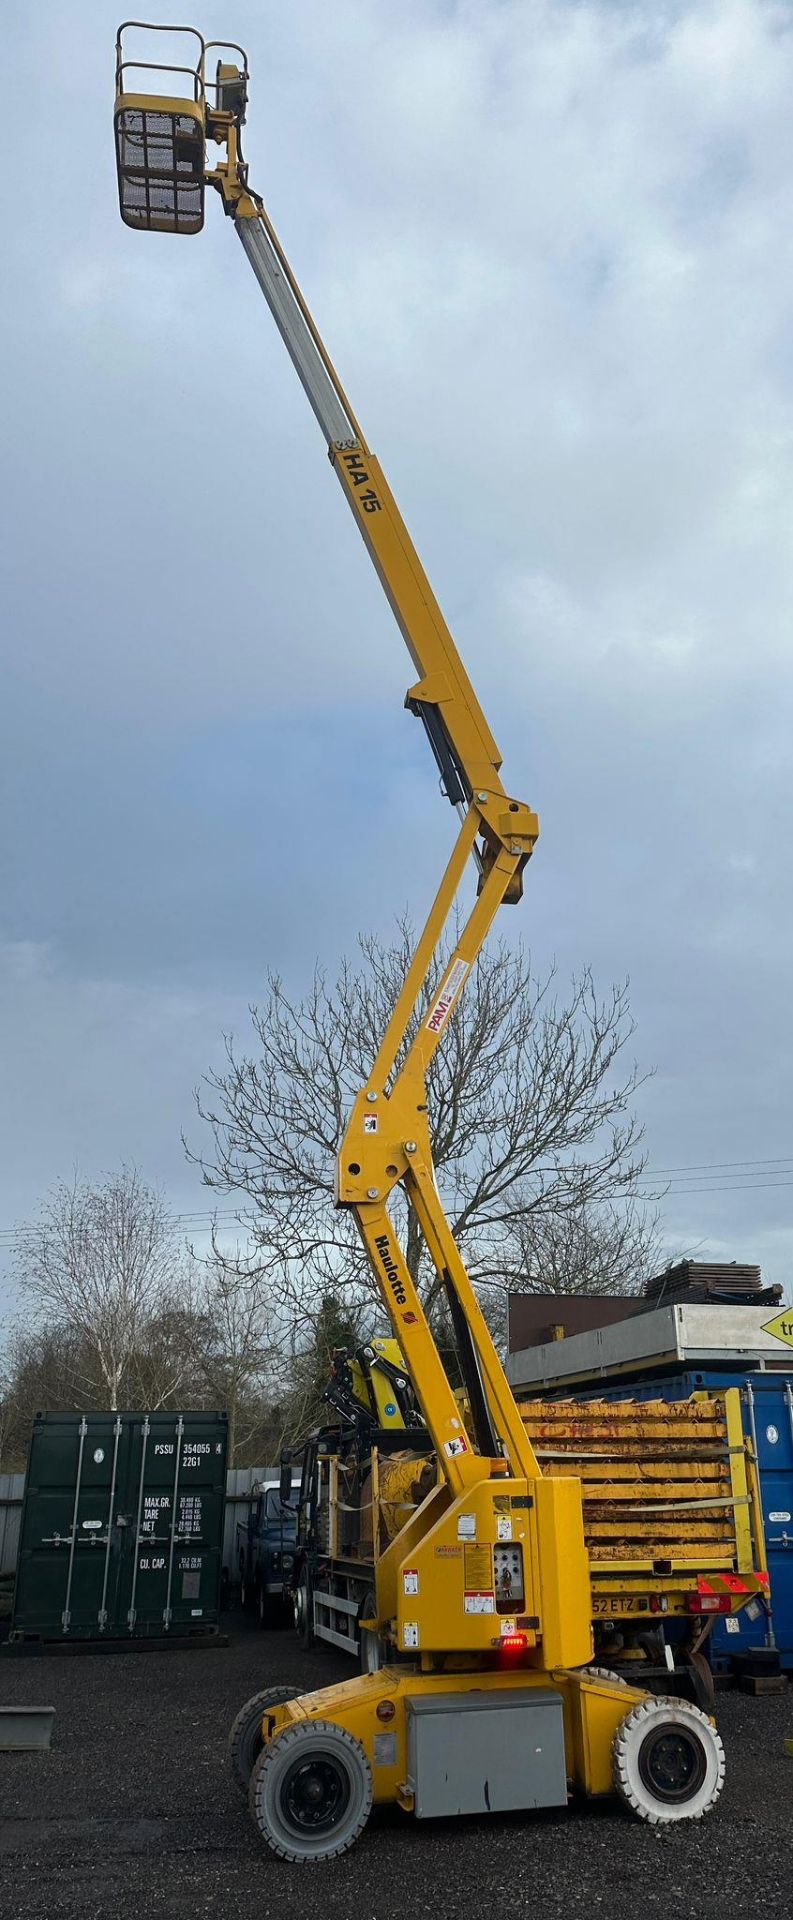 INDOOR HAULETTE HAISI 48V HA15 CHERRY PICKER APPROX 2000 HOURS BUILT IN 110/240V CHARGER 15 METRE - Image 4 of 10